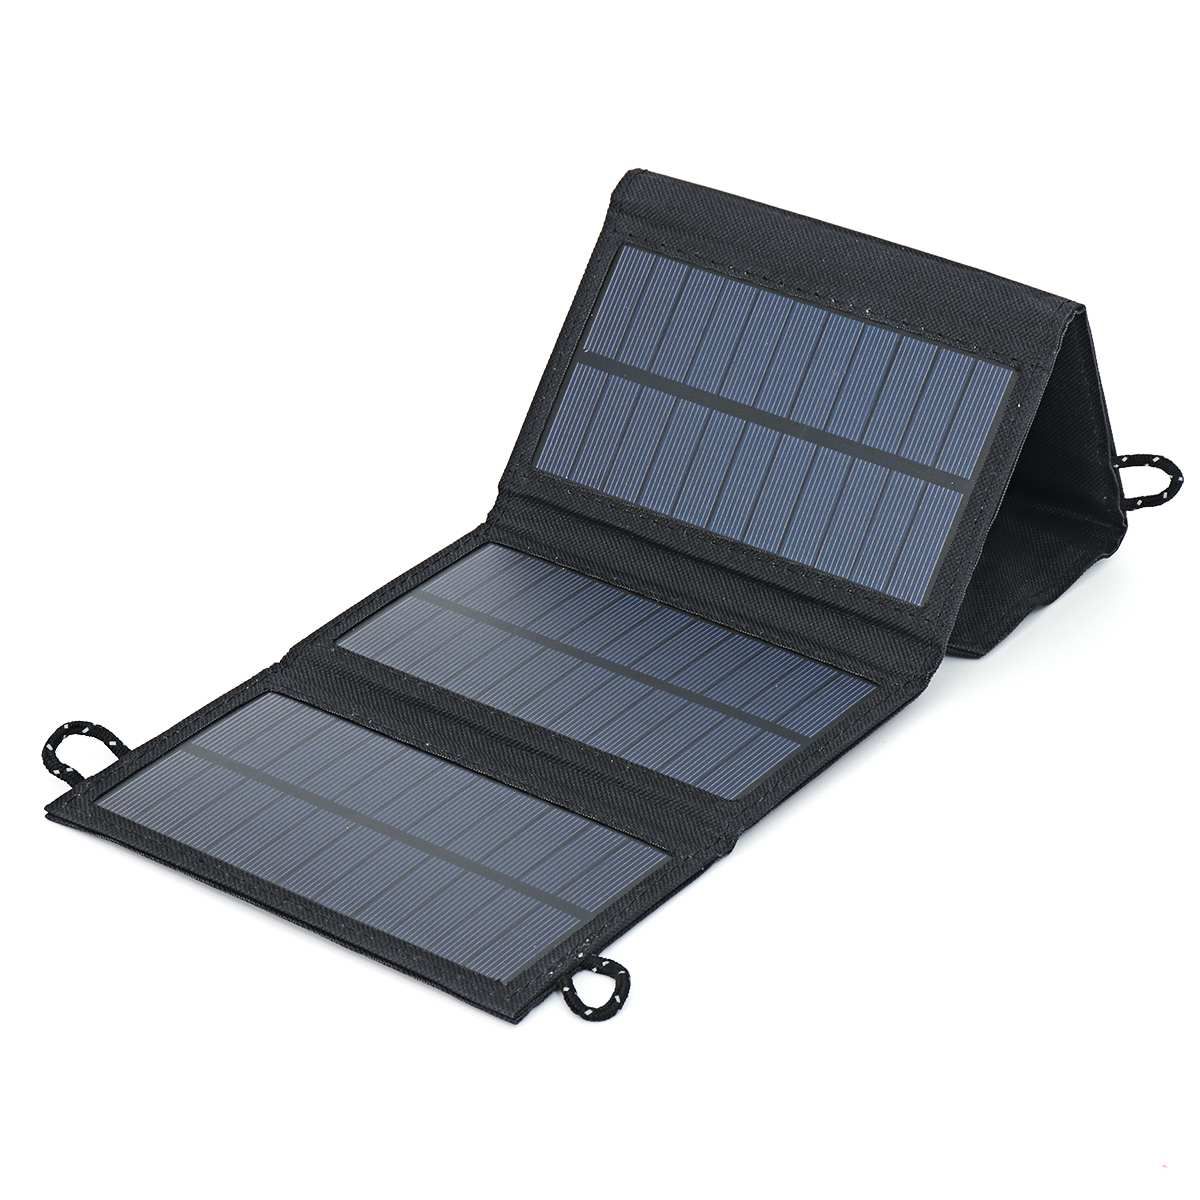 Foldable 50W Solar Panel Charger Usb Solar Battery Pack Camping And Hiking Solar Charging Device Power Supply Outdoor Indoor